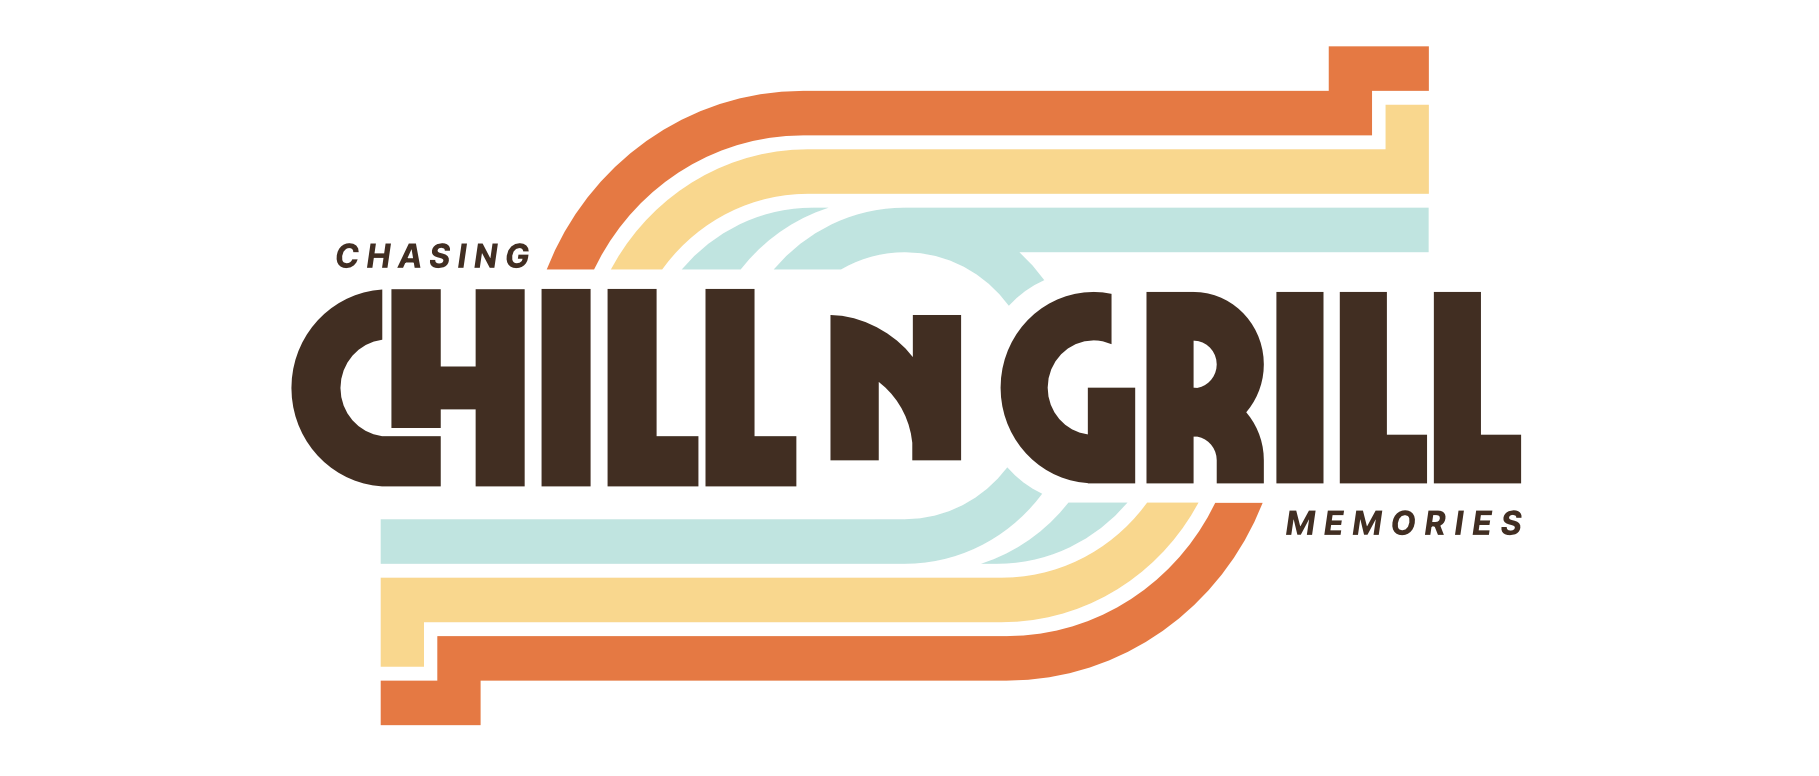 Chill’n’Grill